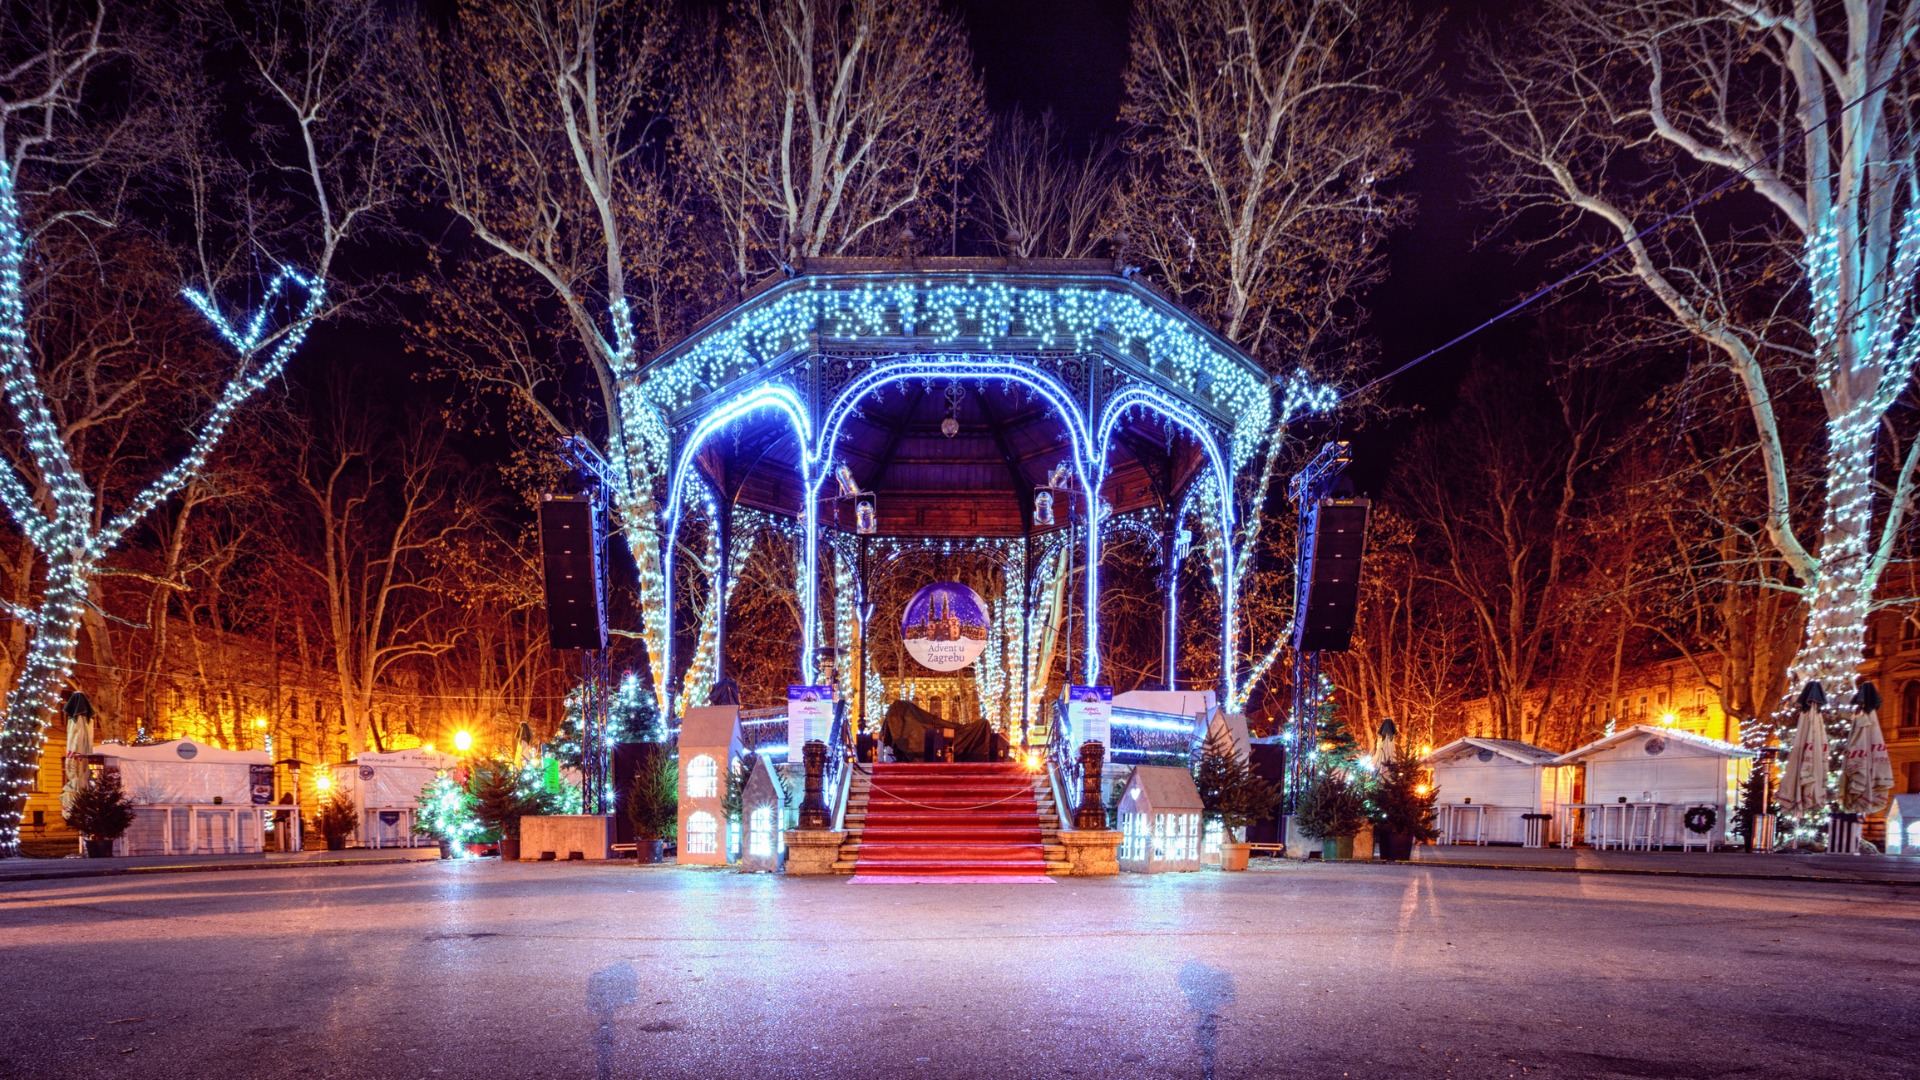 This image shows Christmas decorations in Zagreb.